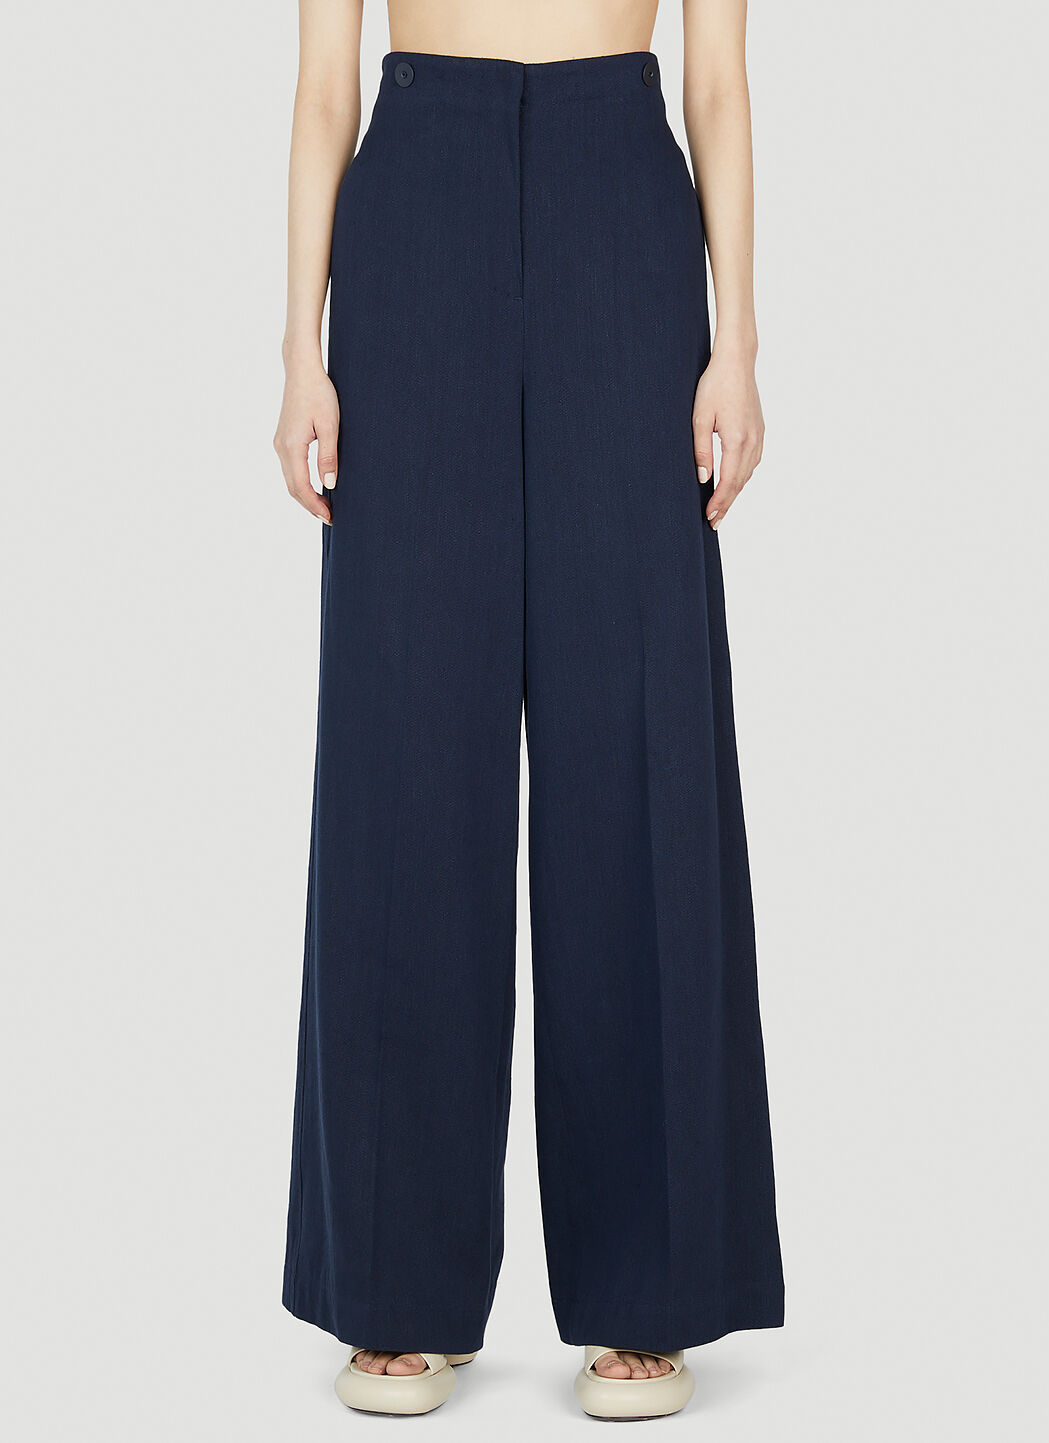 Max Mara Printed Trousers outlet - Women - 1800 products on sale |  FASHIOLA.co.uk